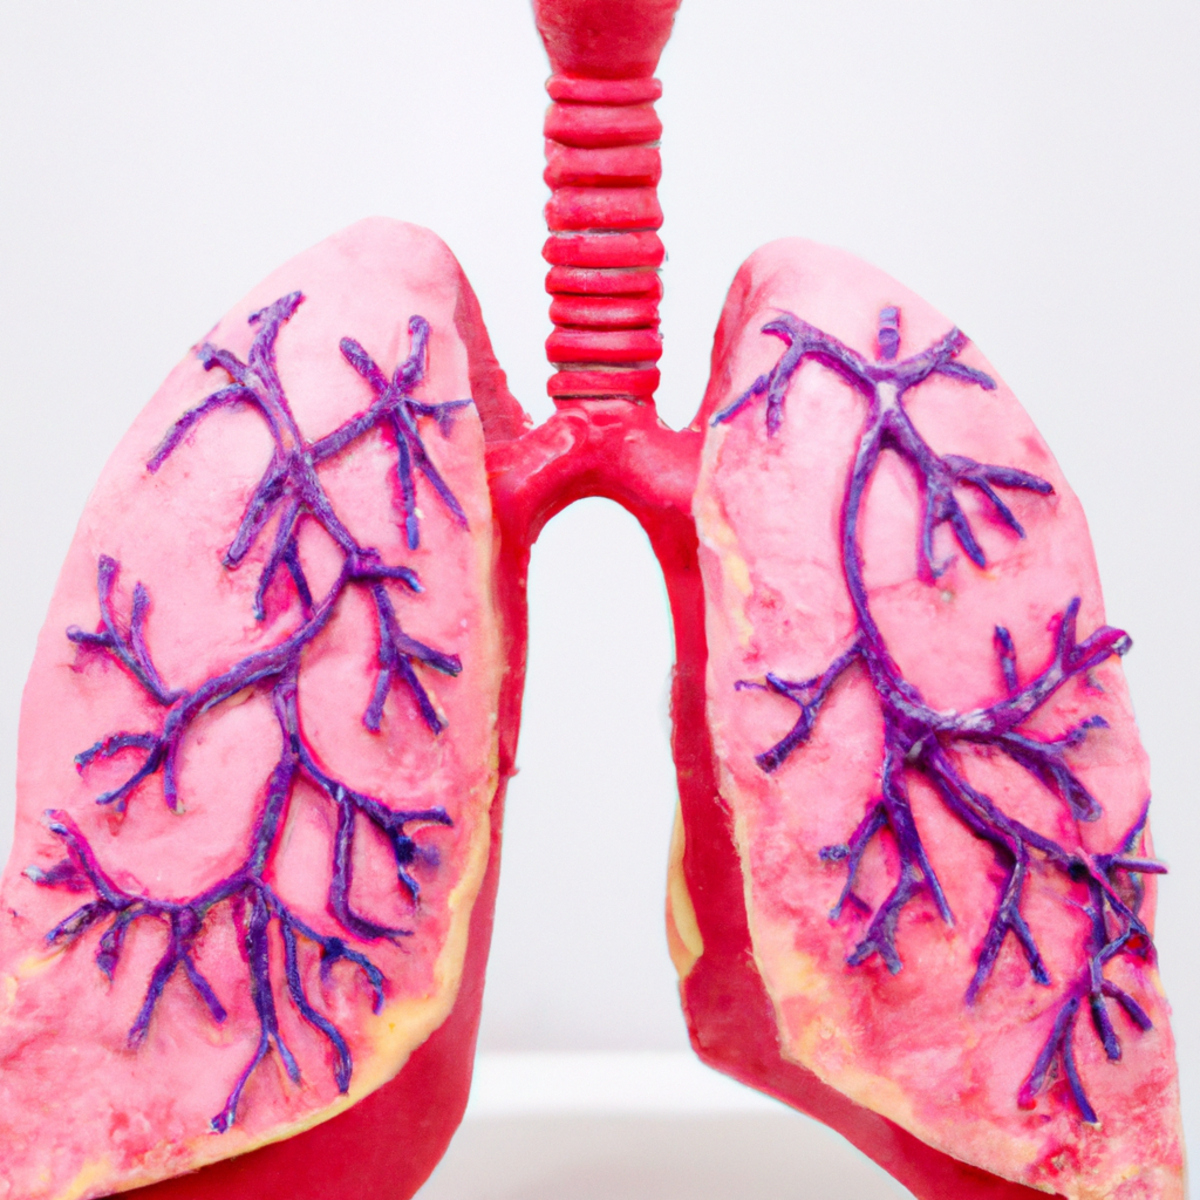 Detailed lung models showing healthy and diseased states, with a stethoscope - Desquamative Interstitial Pneumonia (DIP)